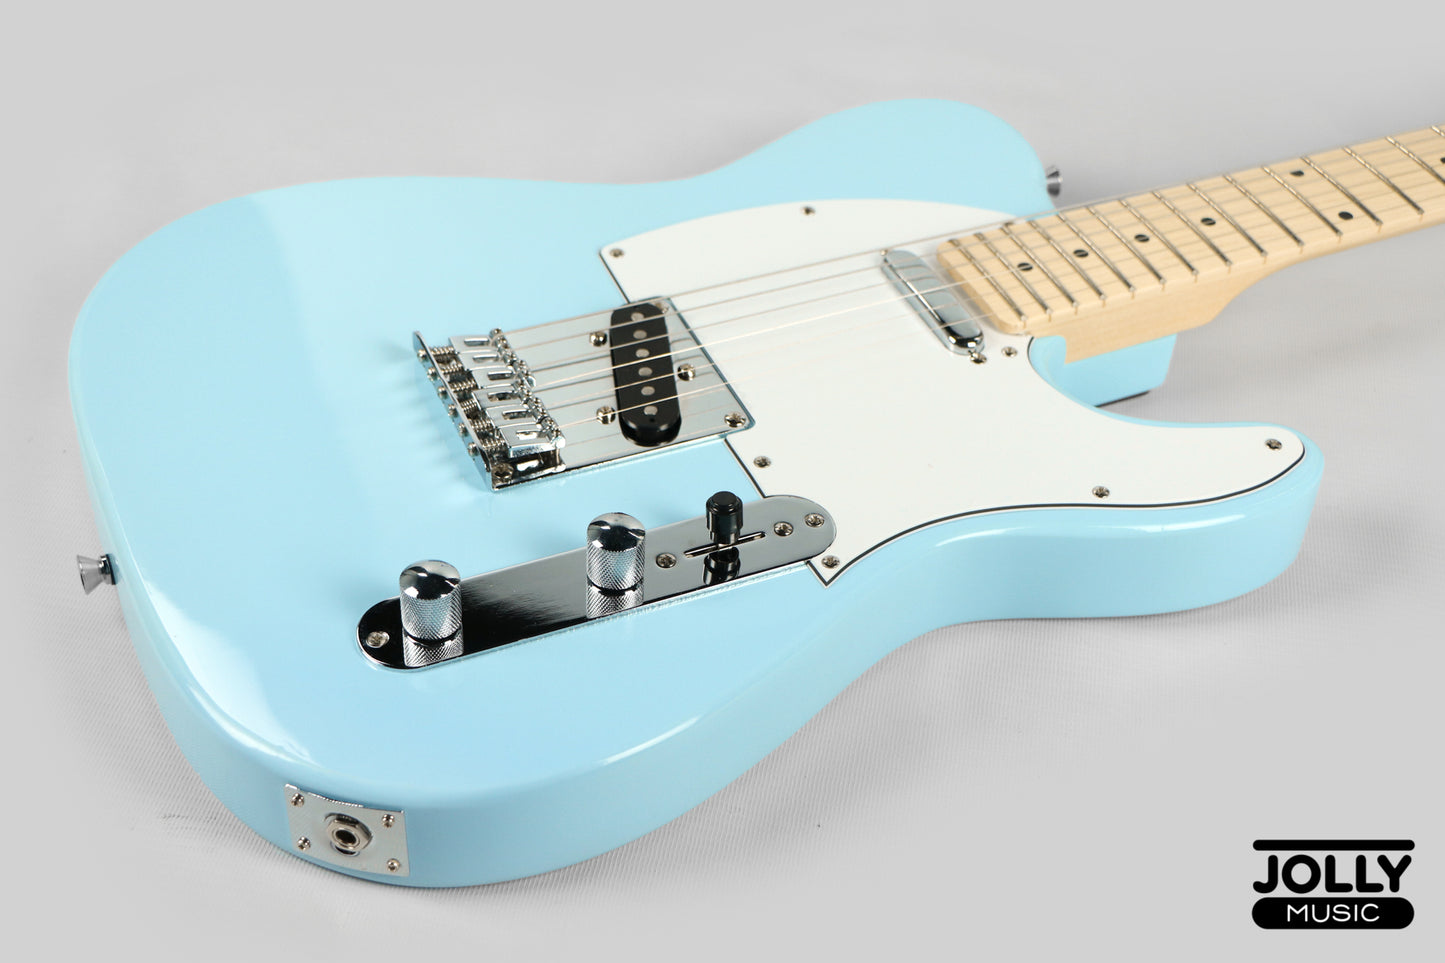 JCraft T-1 T-Style Electric Guitar with Gigbag - Light Blue